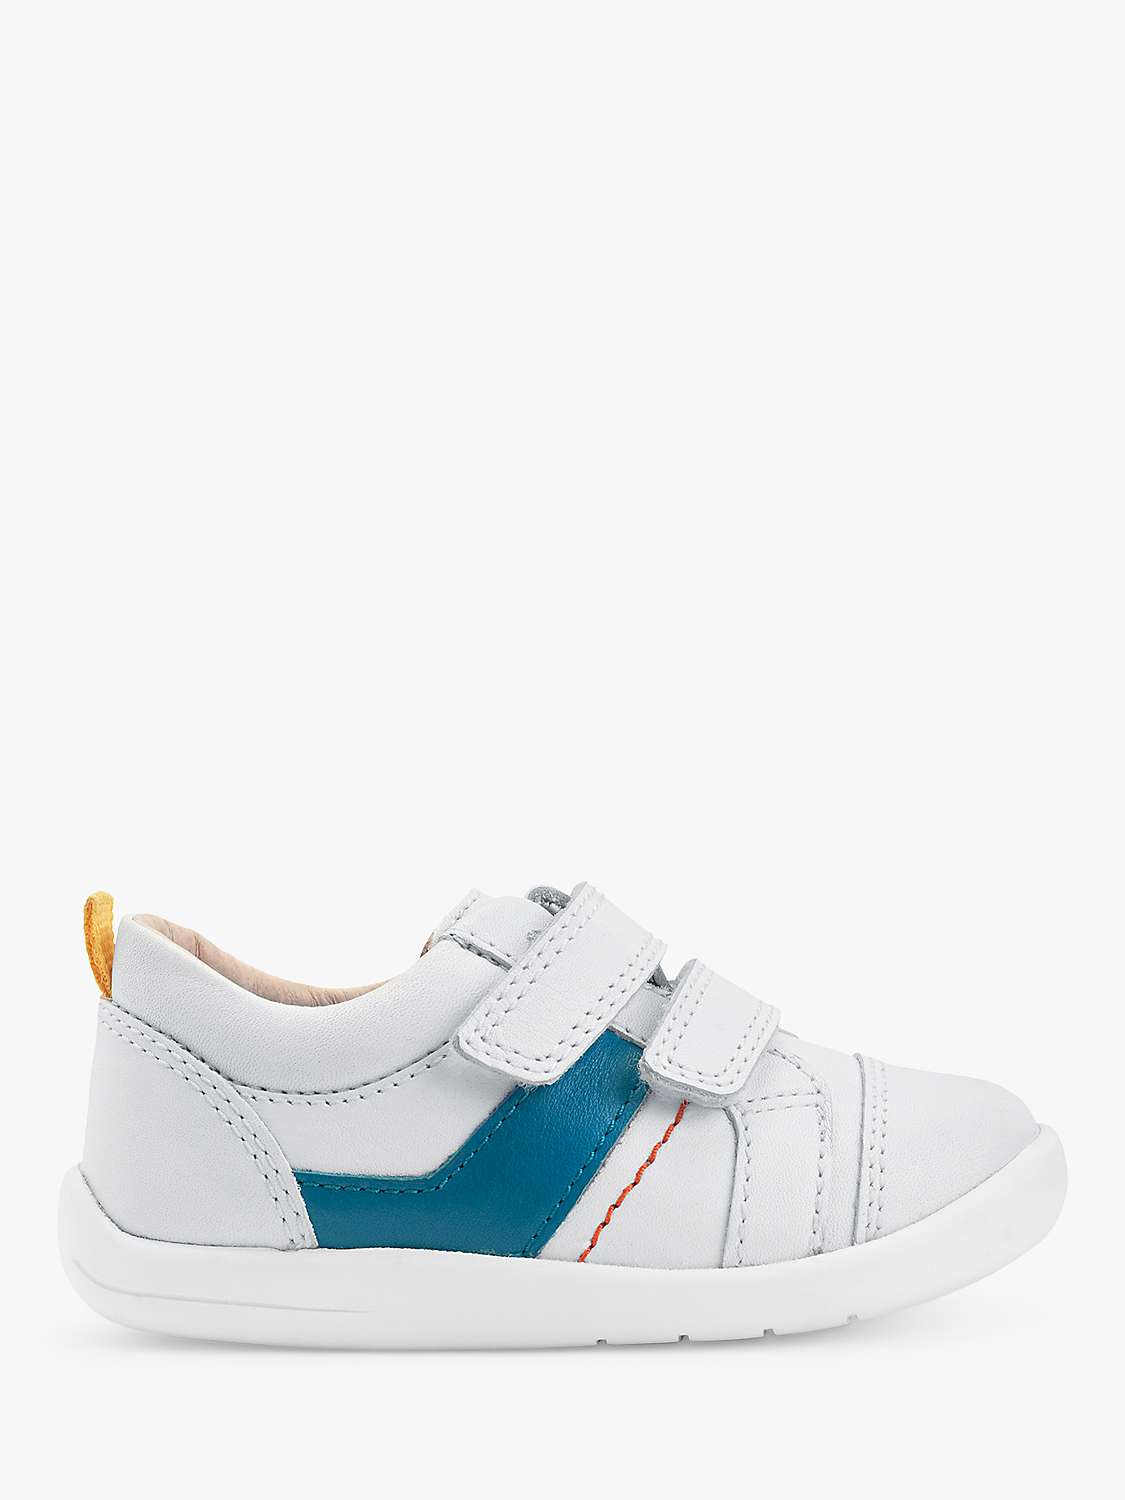 Buy Start-Rite Baby Maze Leather Pre Walker Shoes, White Online at johnlewis.com